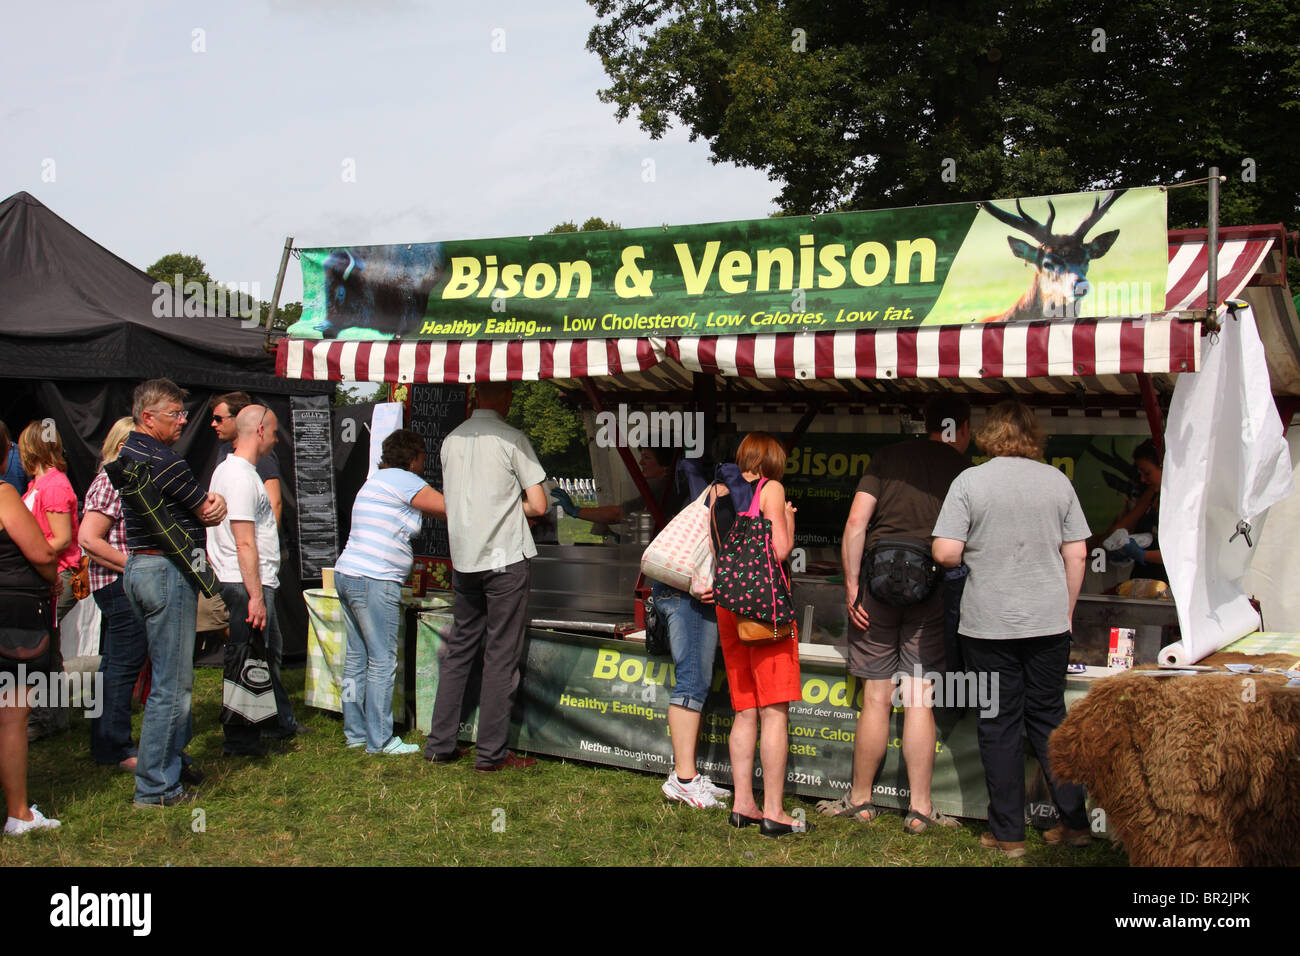 A stall selling bison & venison burgers at the Chatsworth Game Fair,  Derbyshire, England, U.K Stock Photo - Alamy